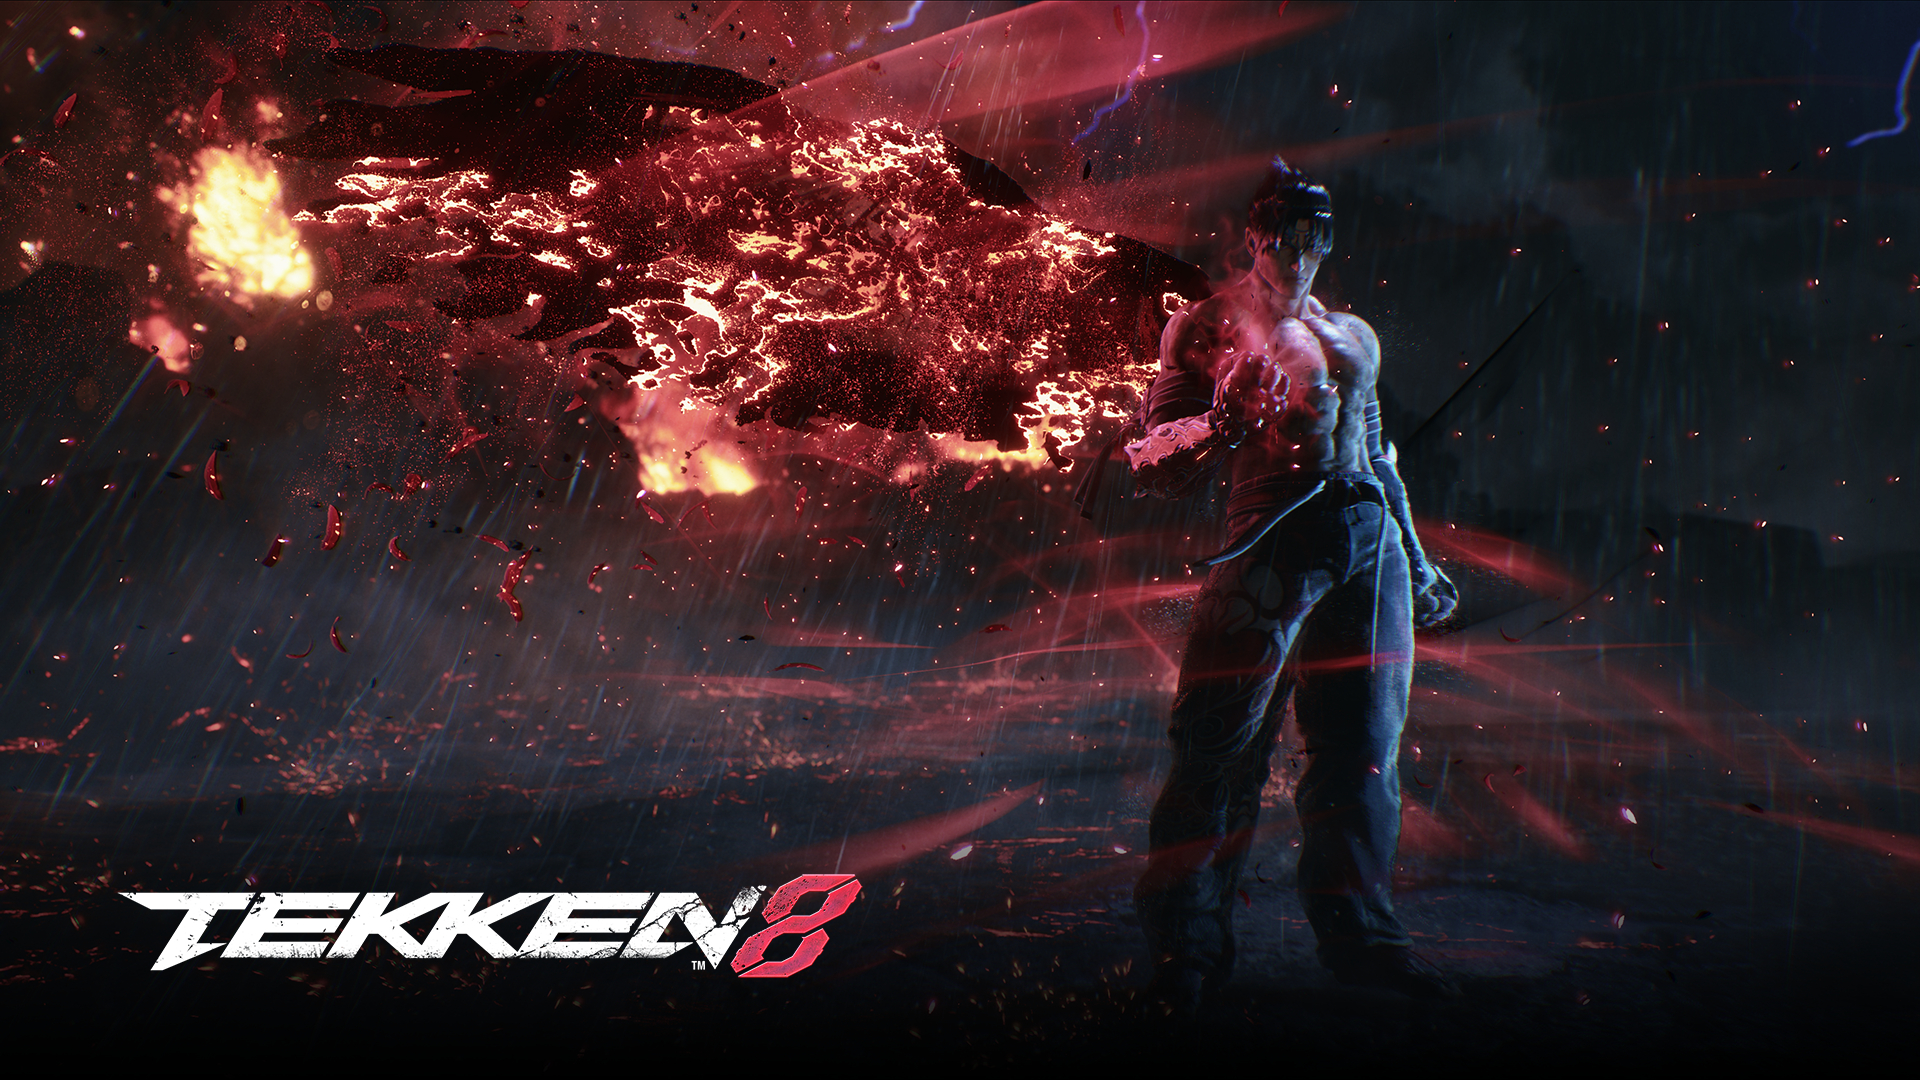 Hd Tekken 8 Game Poster Wallpaper Hd Games 4k Wallpapers Images Photos And Background Wallpapers Den